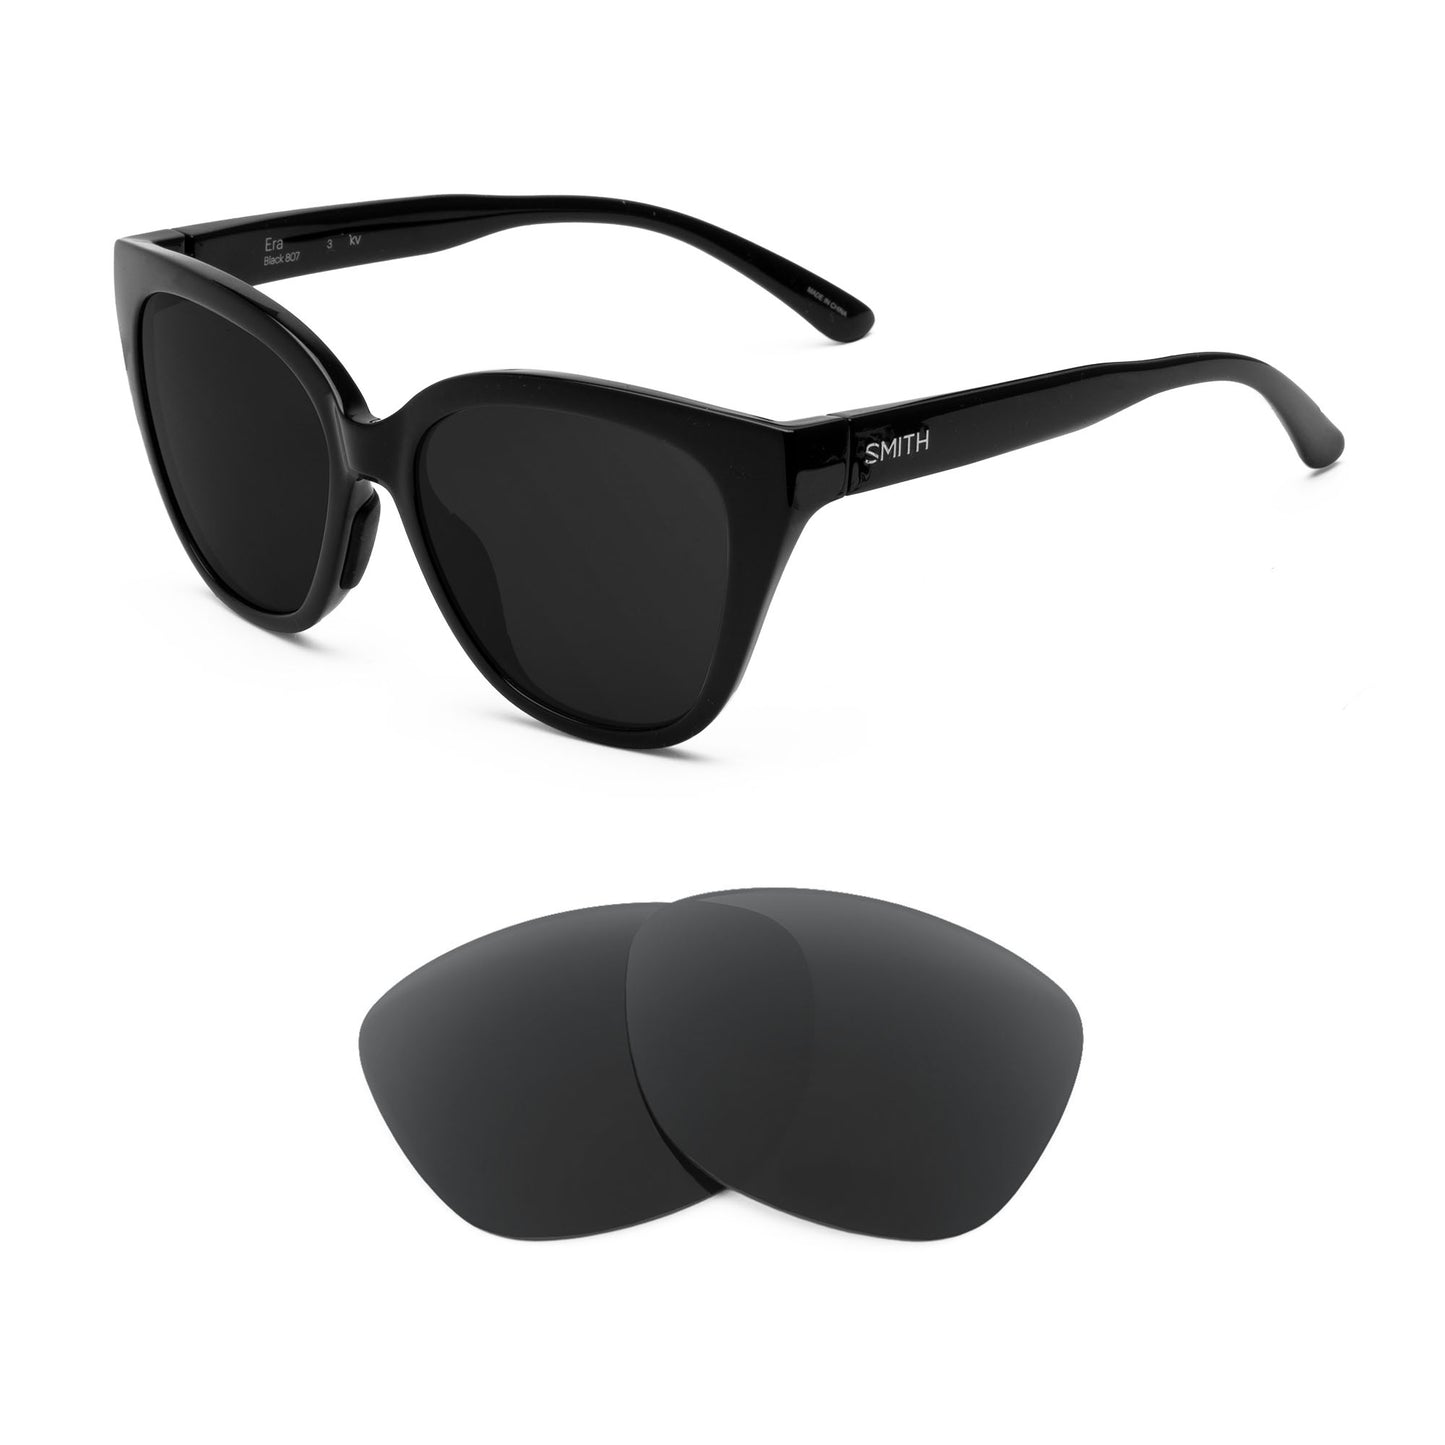 Smith Era sunglasses with replacement lenses